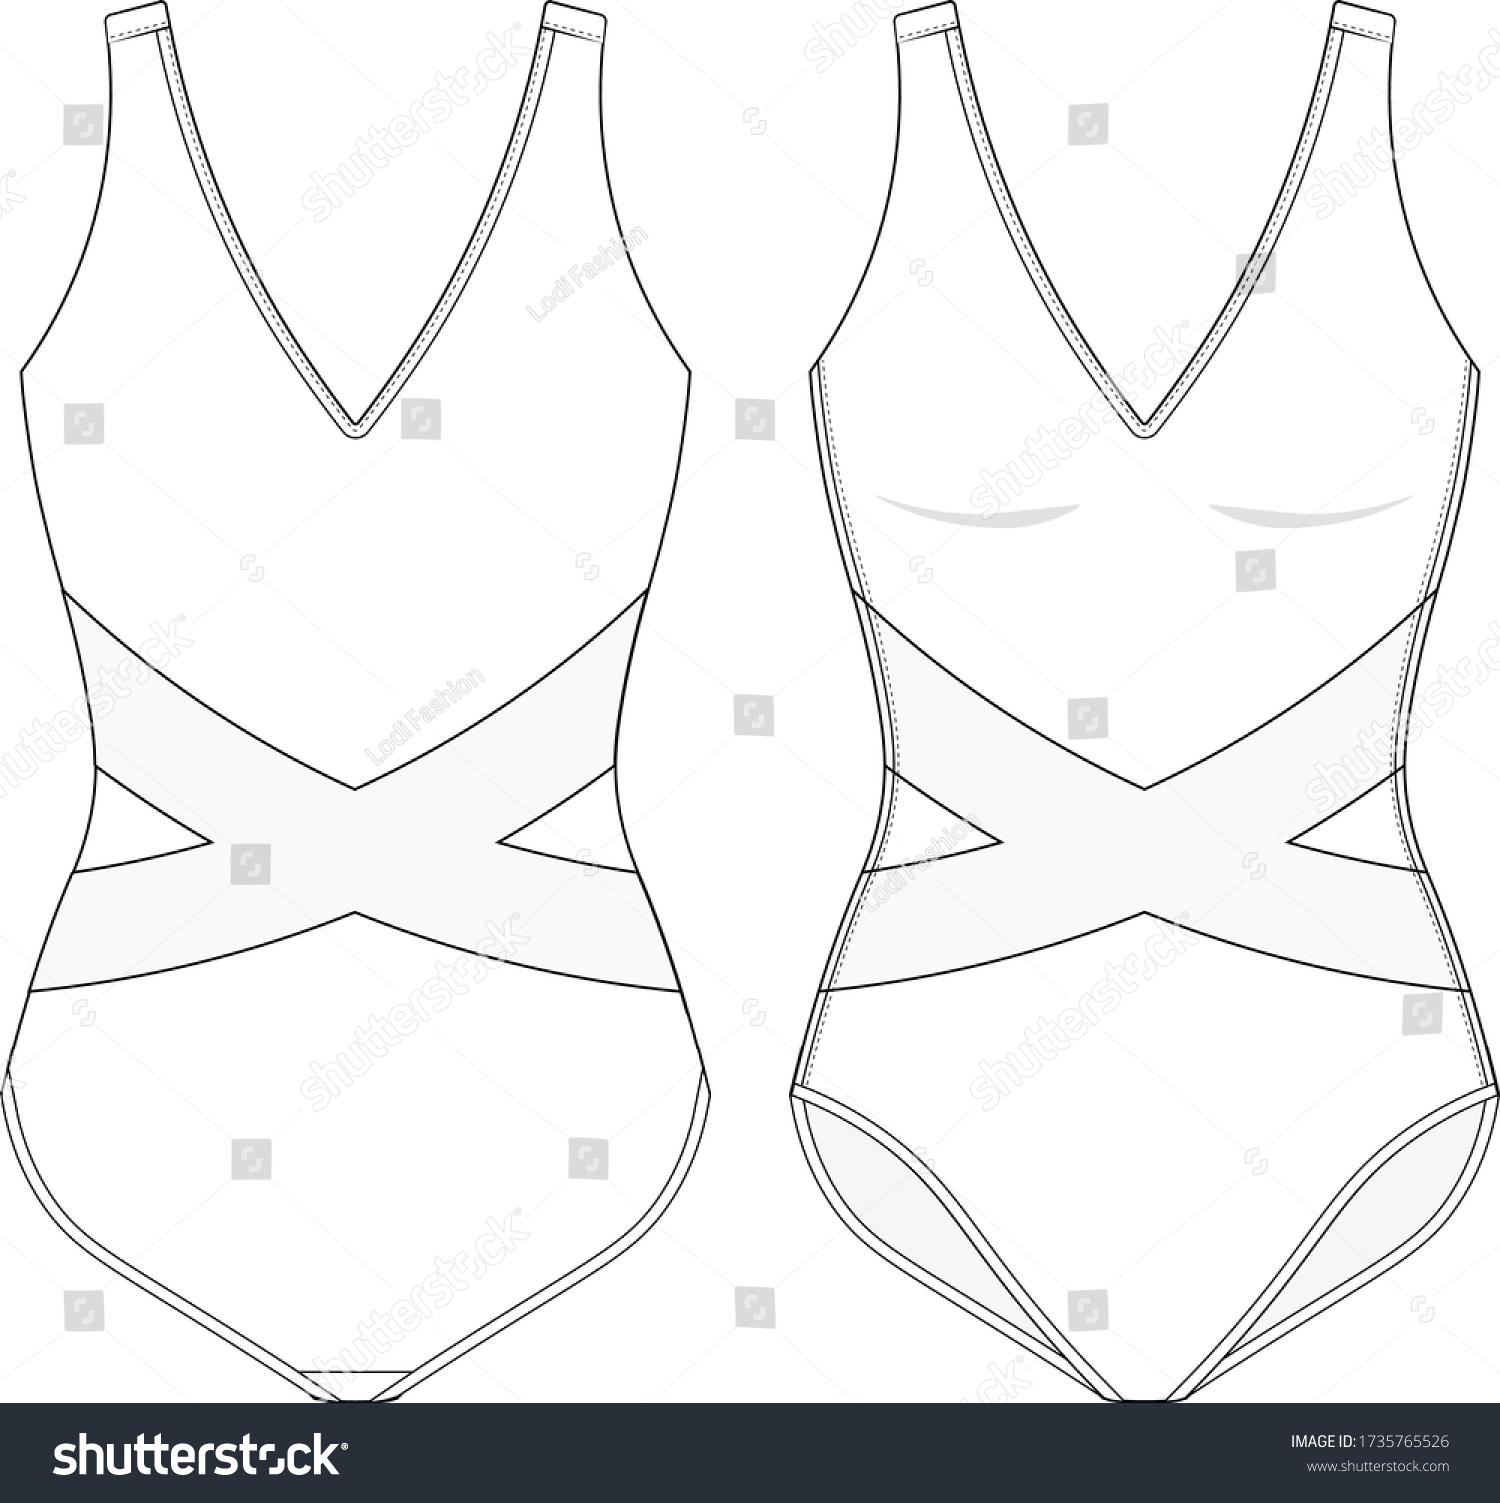 Sample Technical Drawing Sample Onepiece Swimsuit Stock Vector (Royalty ...